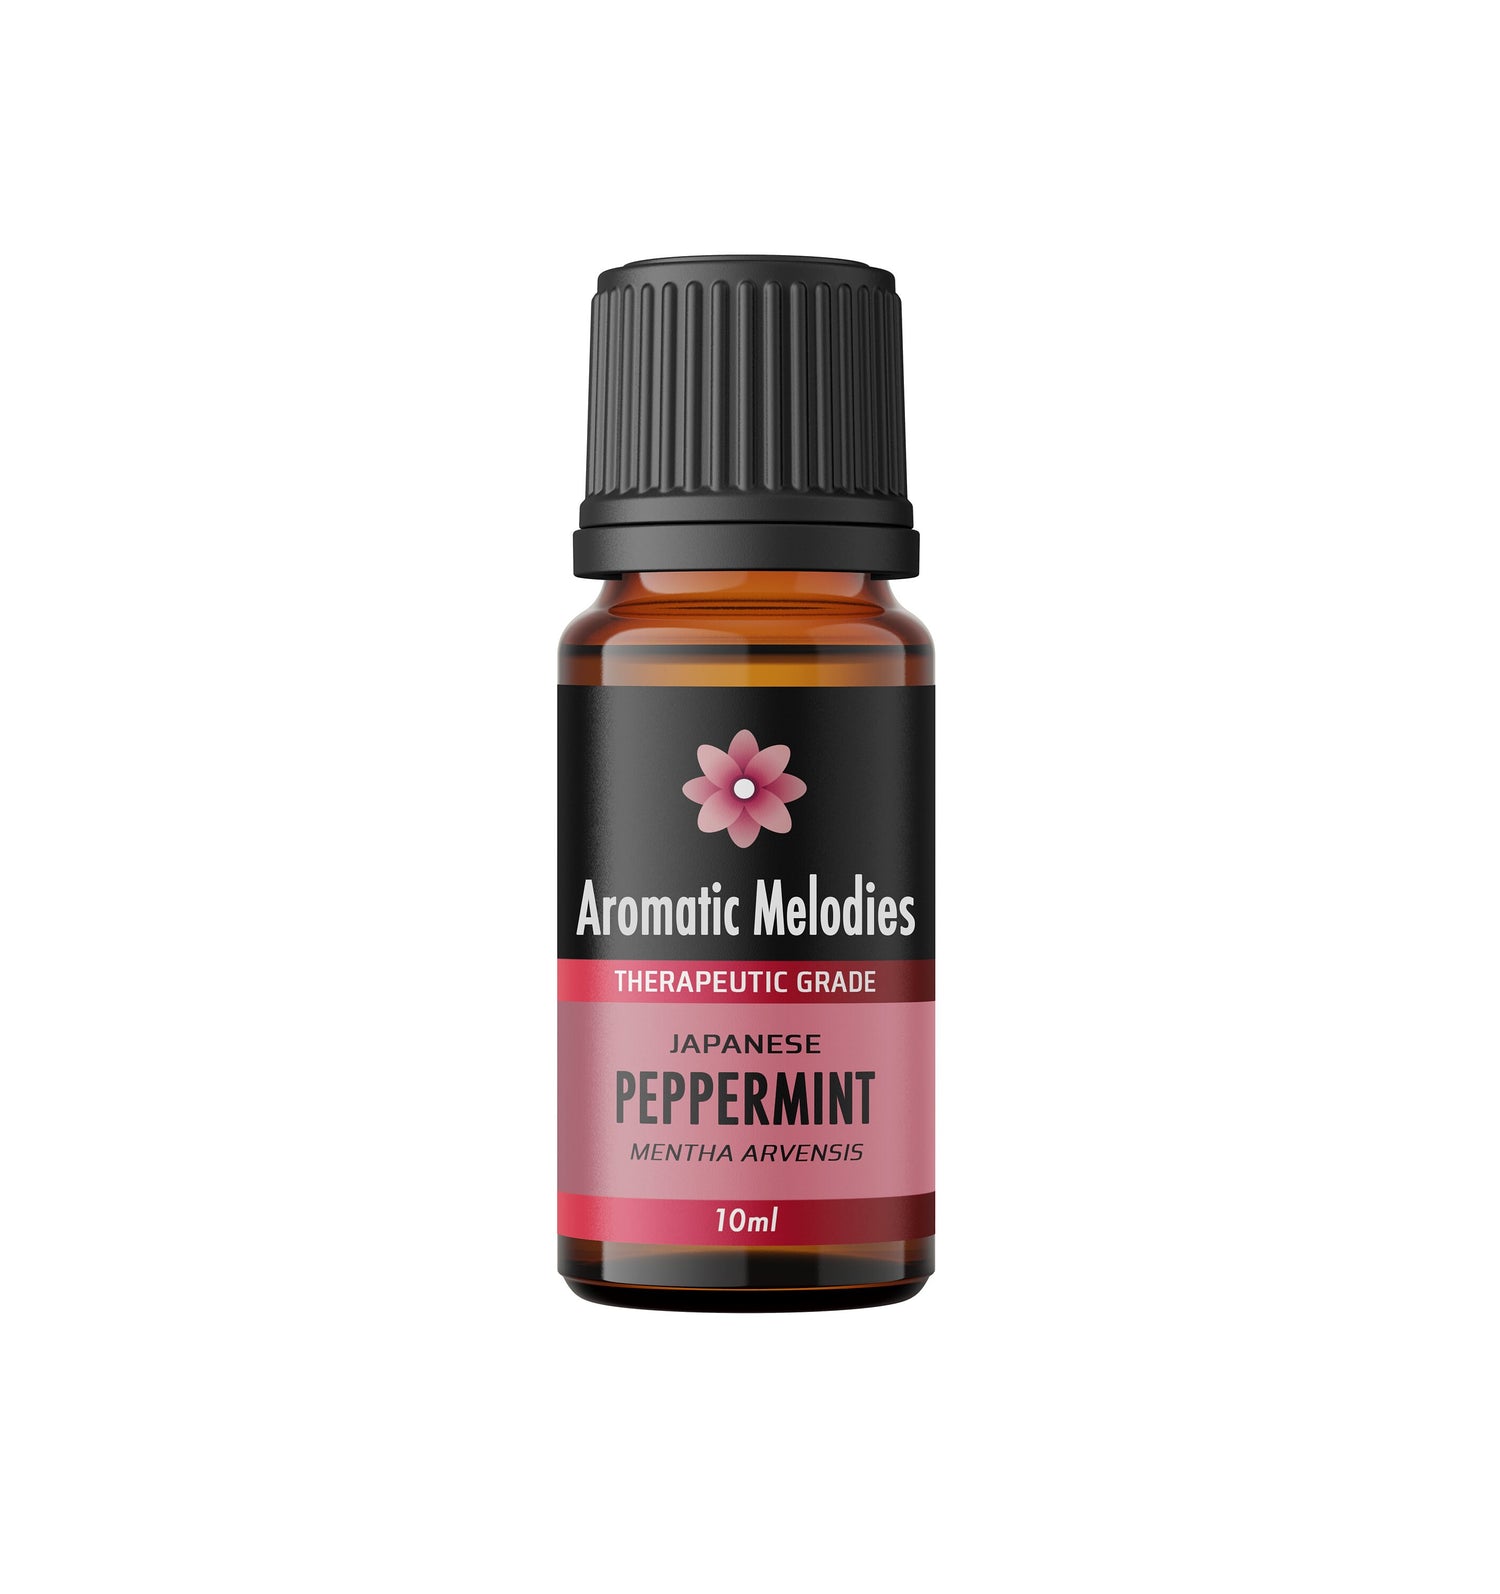 Peppermint (Japanese) Essential Oil - Premium 100% Natural Therapeutic Grade - Oil Diffuser, Massage, Fragrance, Soap, Candles